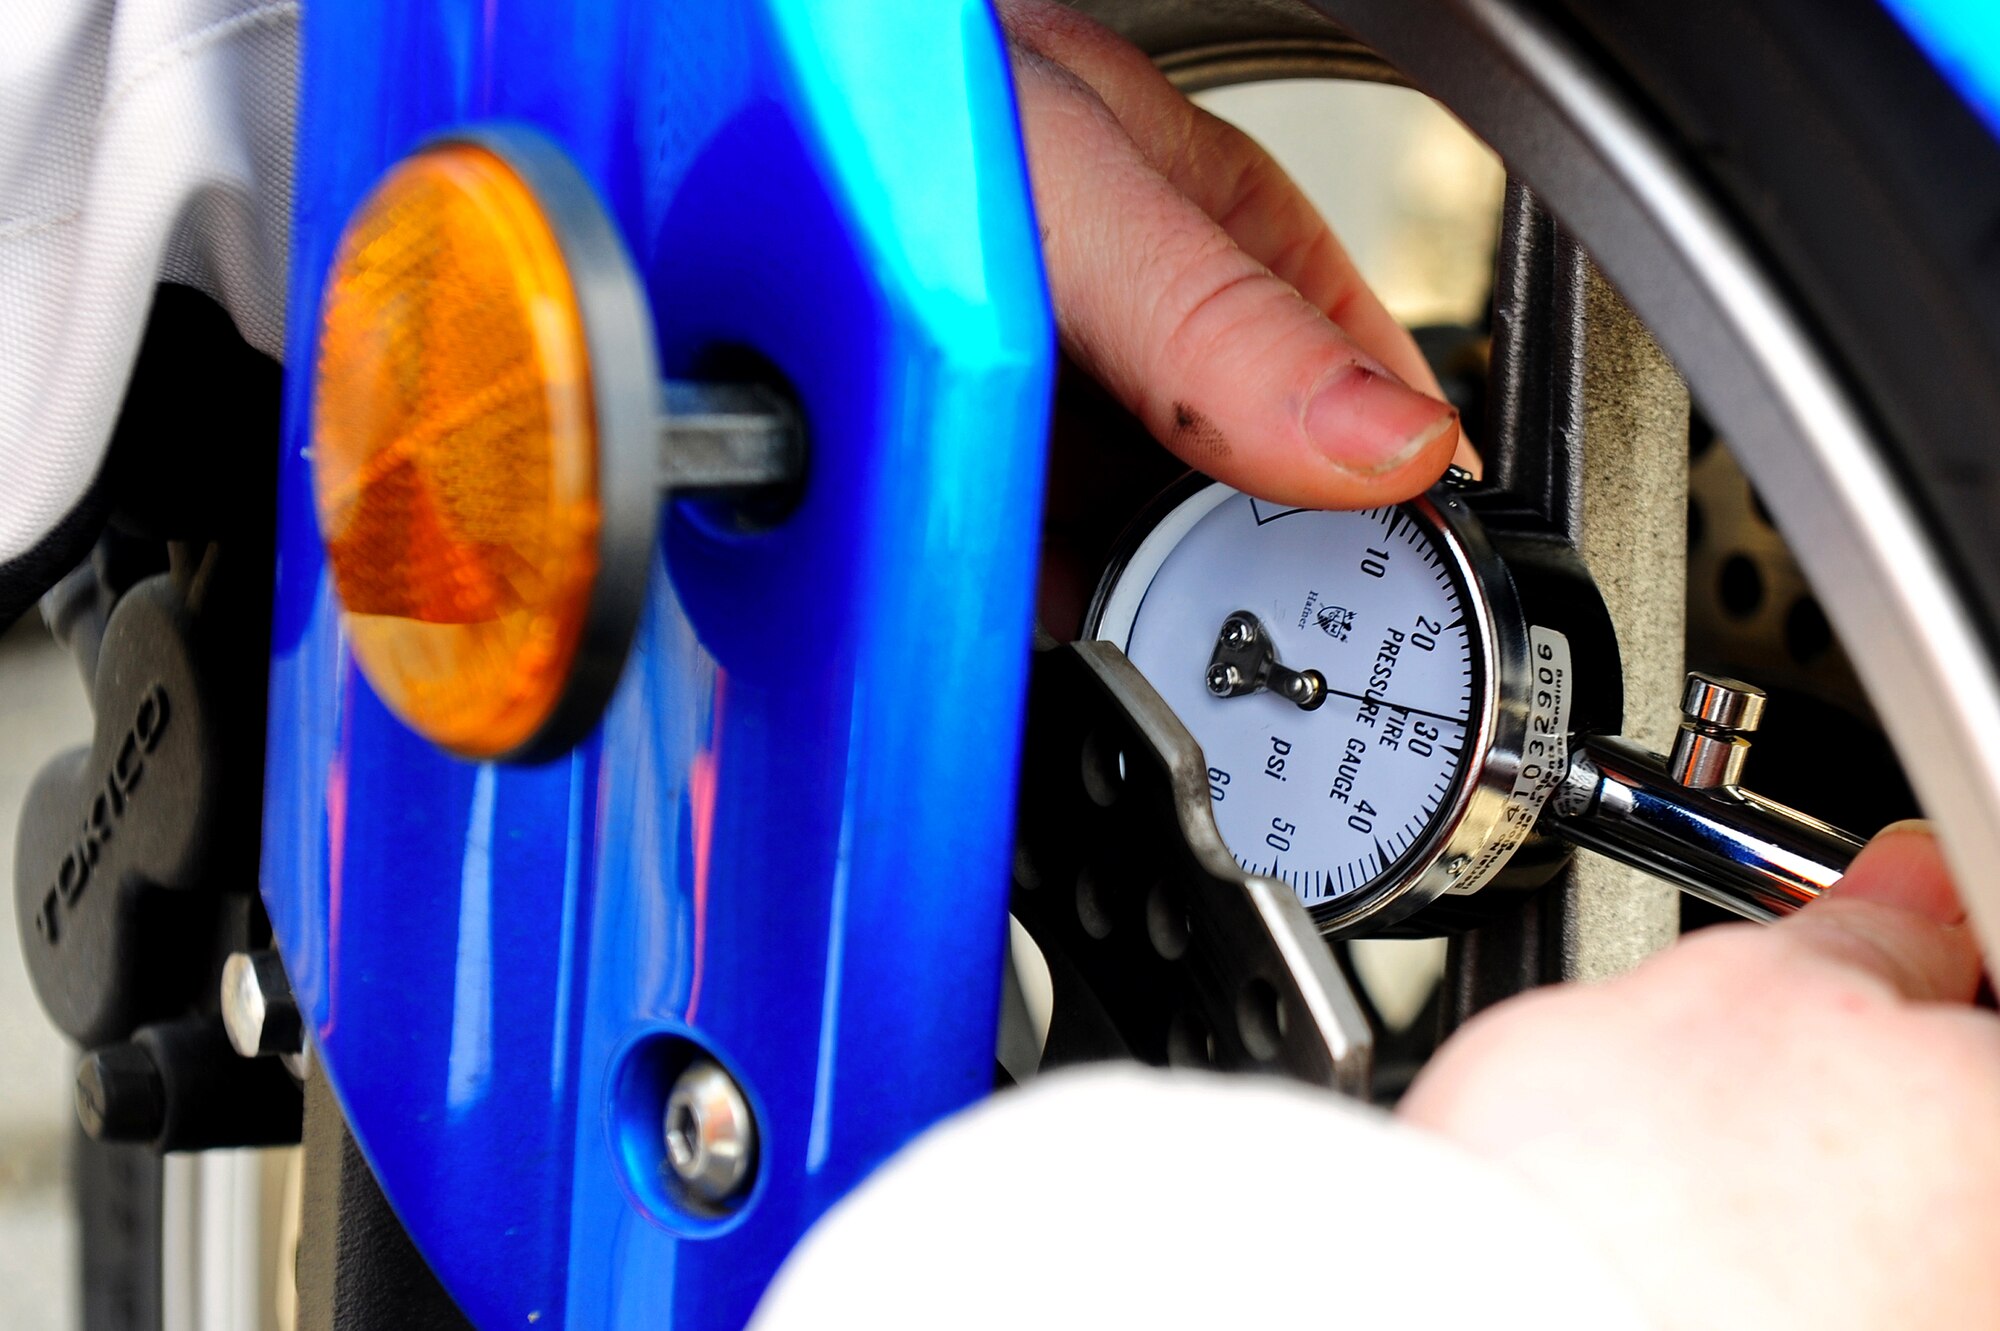 Air Force Tech. Sgt. Monty Nixon, 86th Aircraft Maintenance Squadron maintainer, checks his motorcycle tire pressure using an air compressor during Motorcycle Safety Day, Ramstein Air Base, Germany, March 17, 2012. The safety day was held for the 86th Maintenance Group to promote safe motorcycle practices and raise camaraderie amongst the participants. (U.S. Air Force photo/Airman Brea Miller)